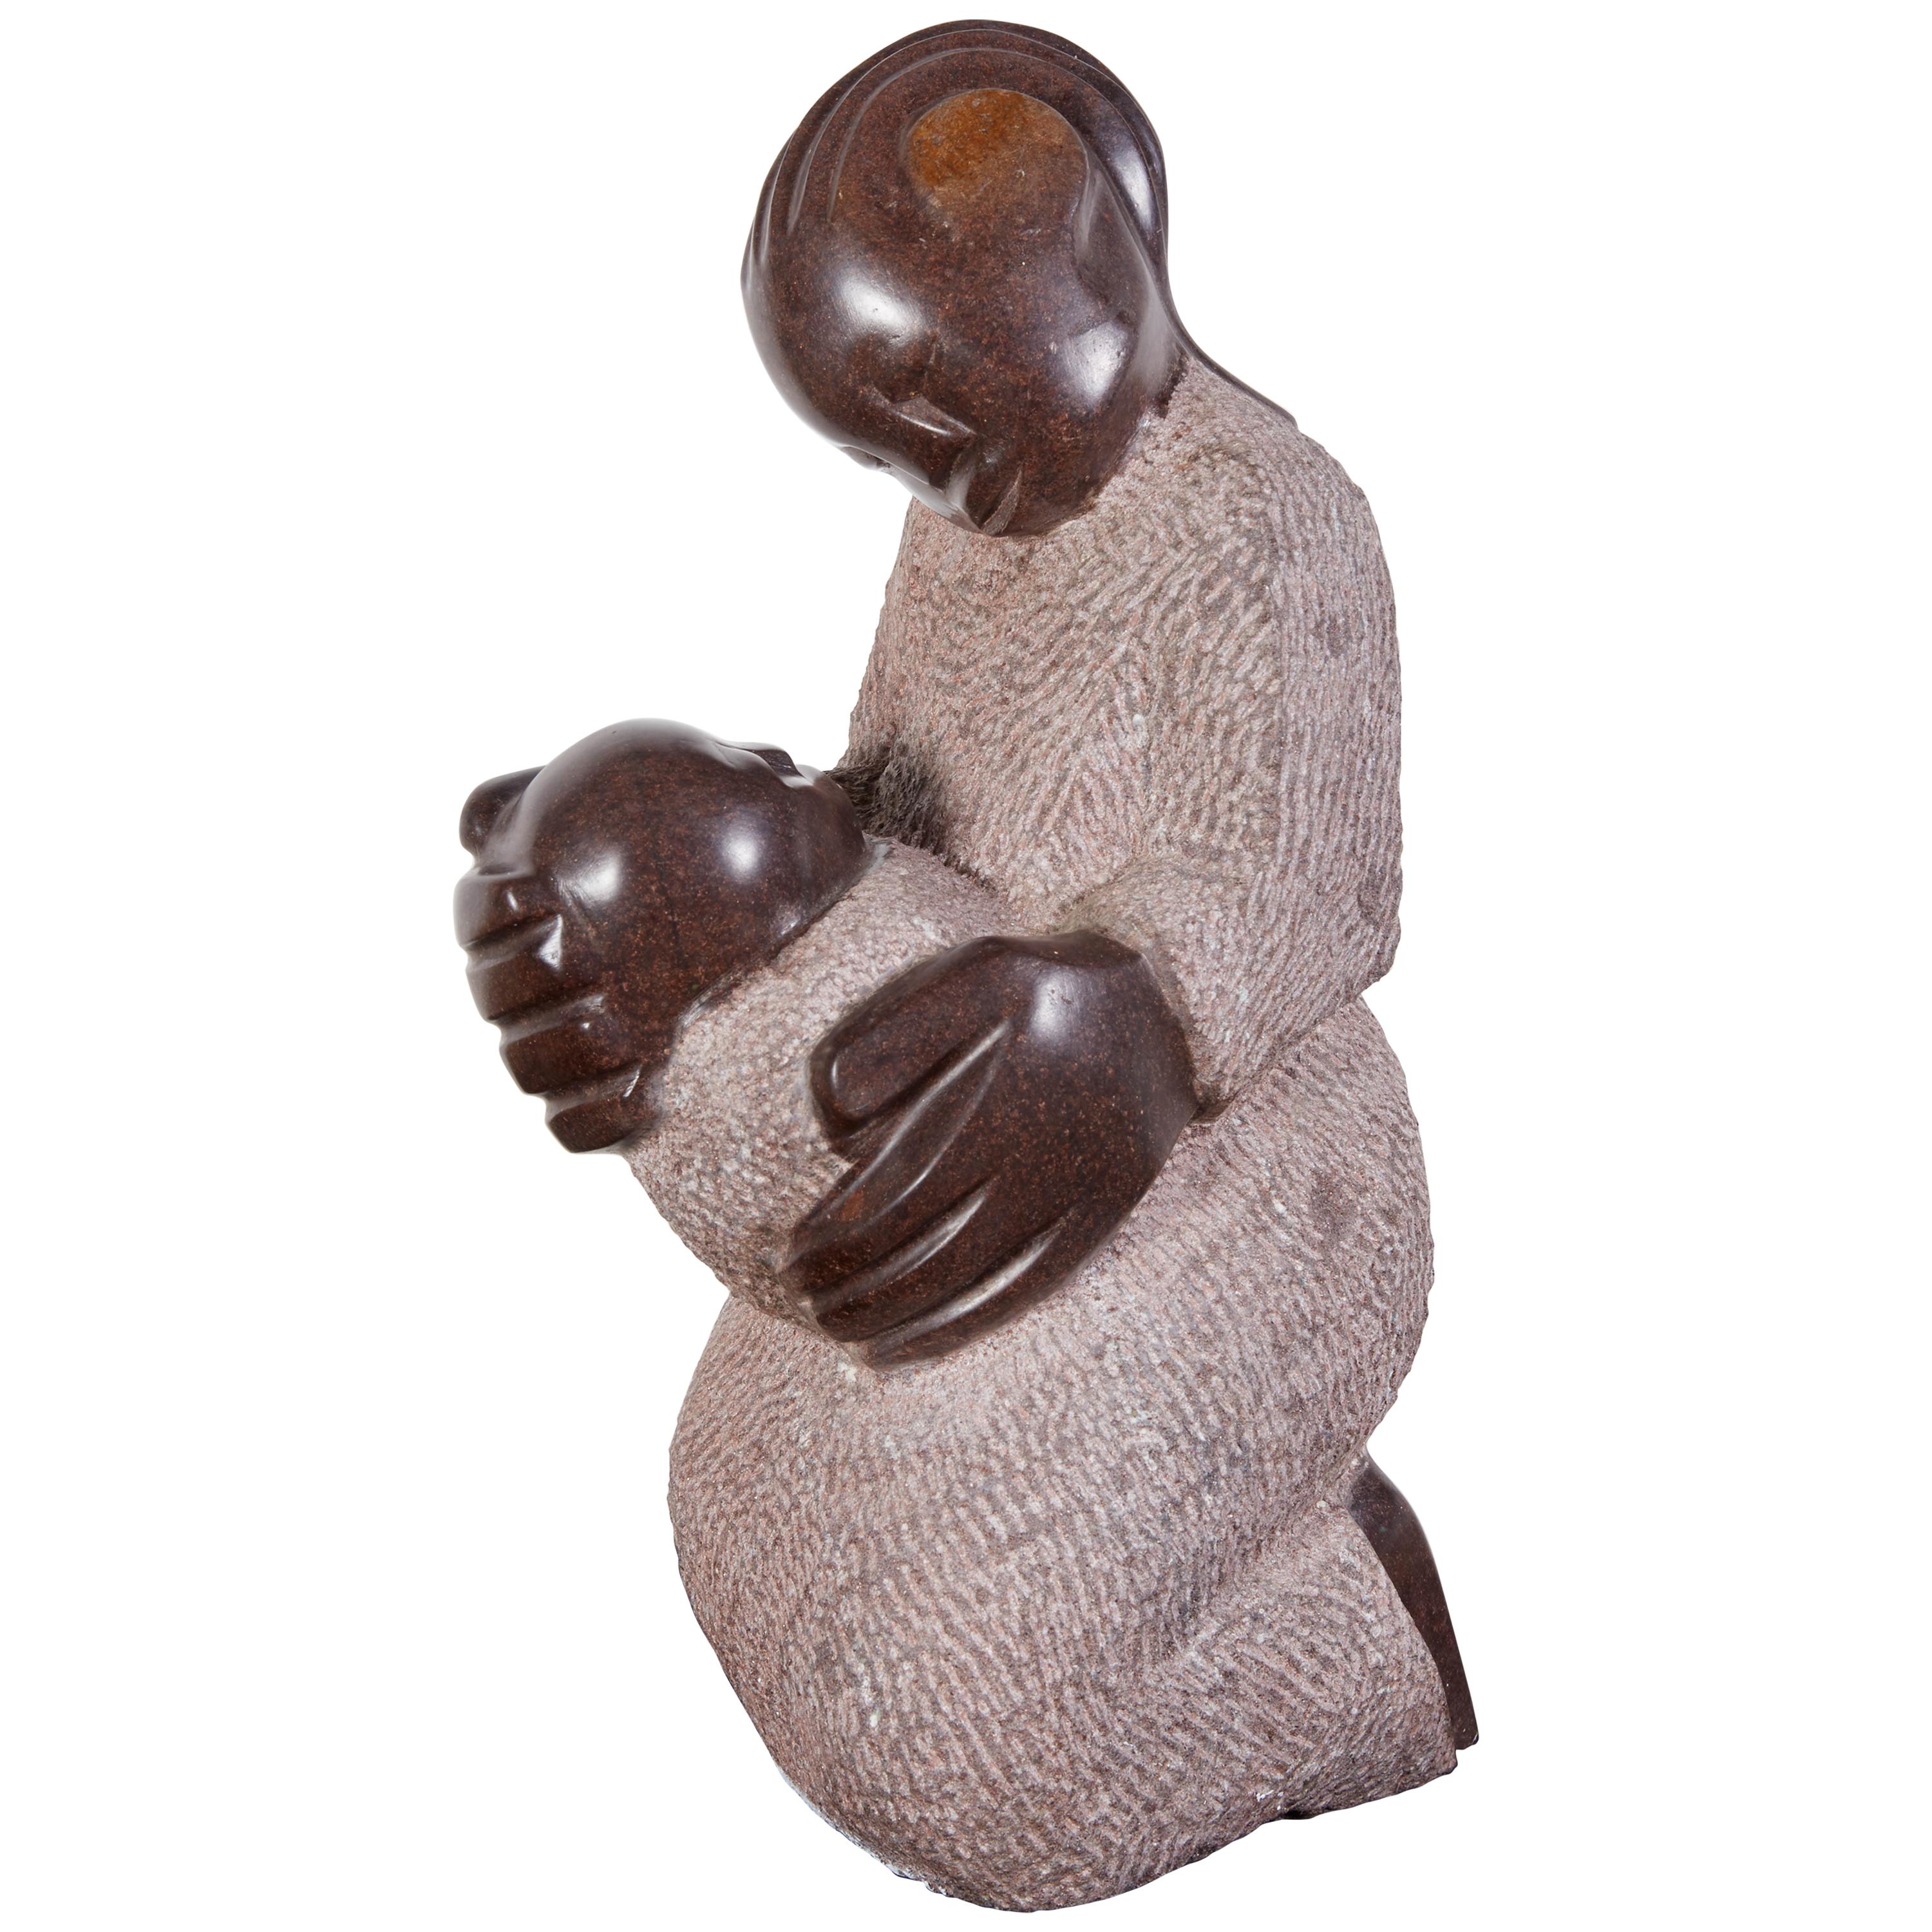 Carved Stone Shona Sculpture, "Mother and Child"